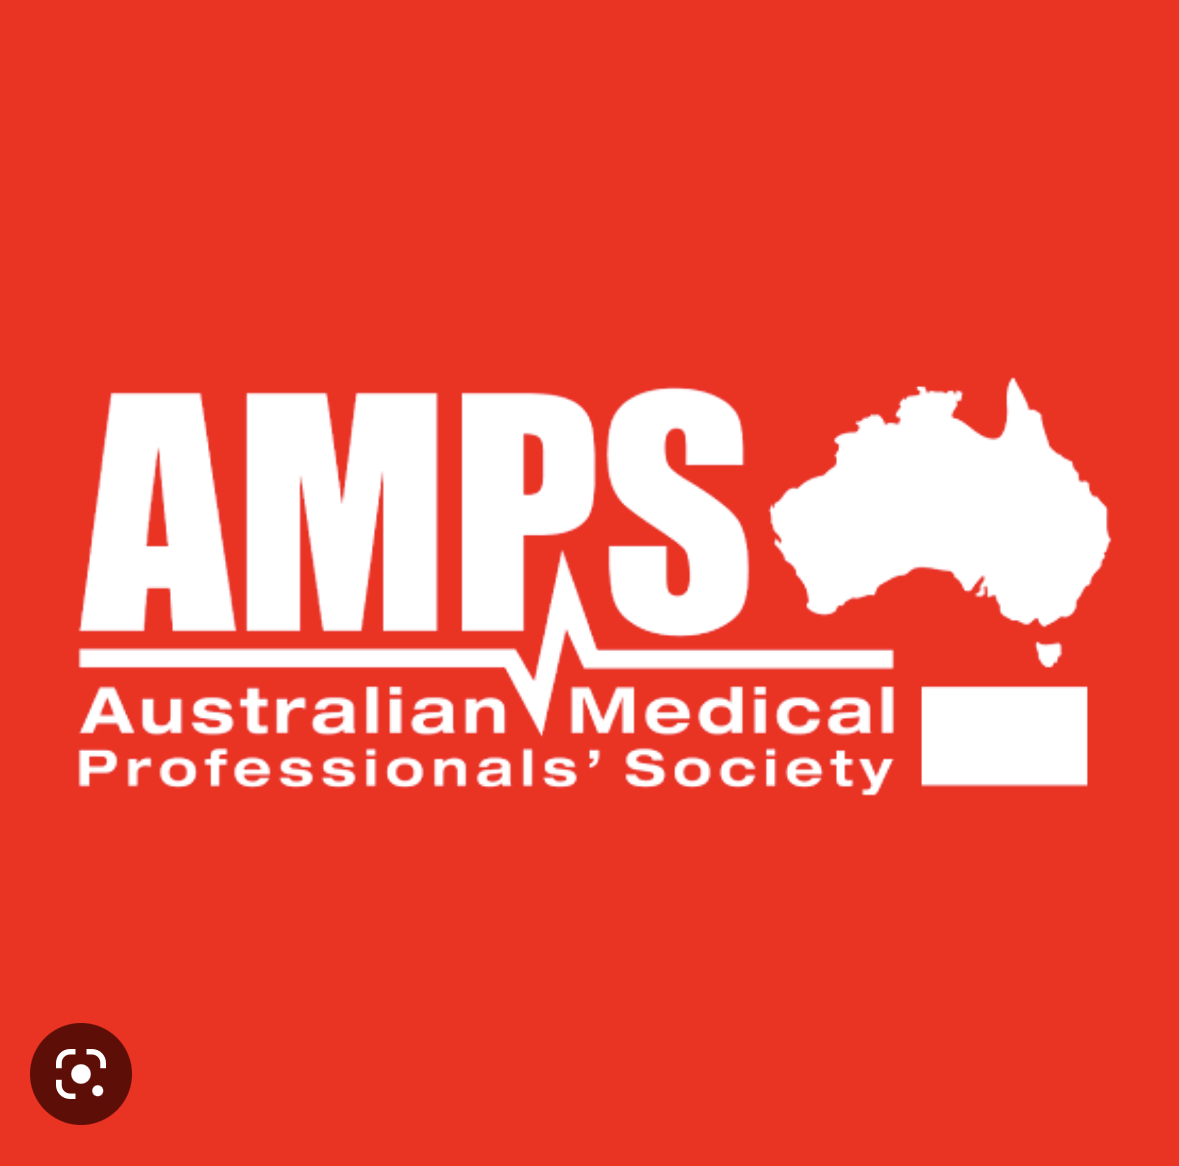 Malcolm Roberts 🇦🇺: The Australian Medical Professionals Society’s mission is to rest…